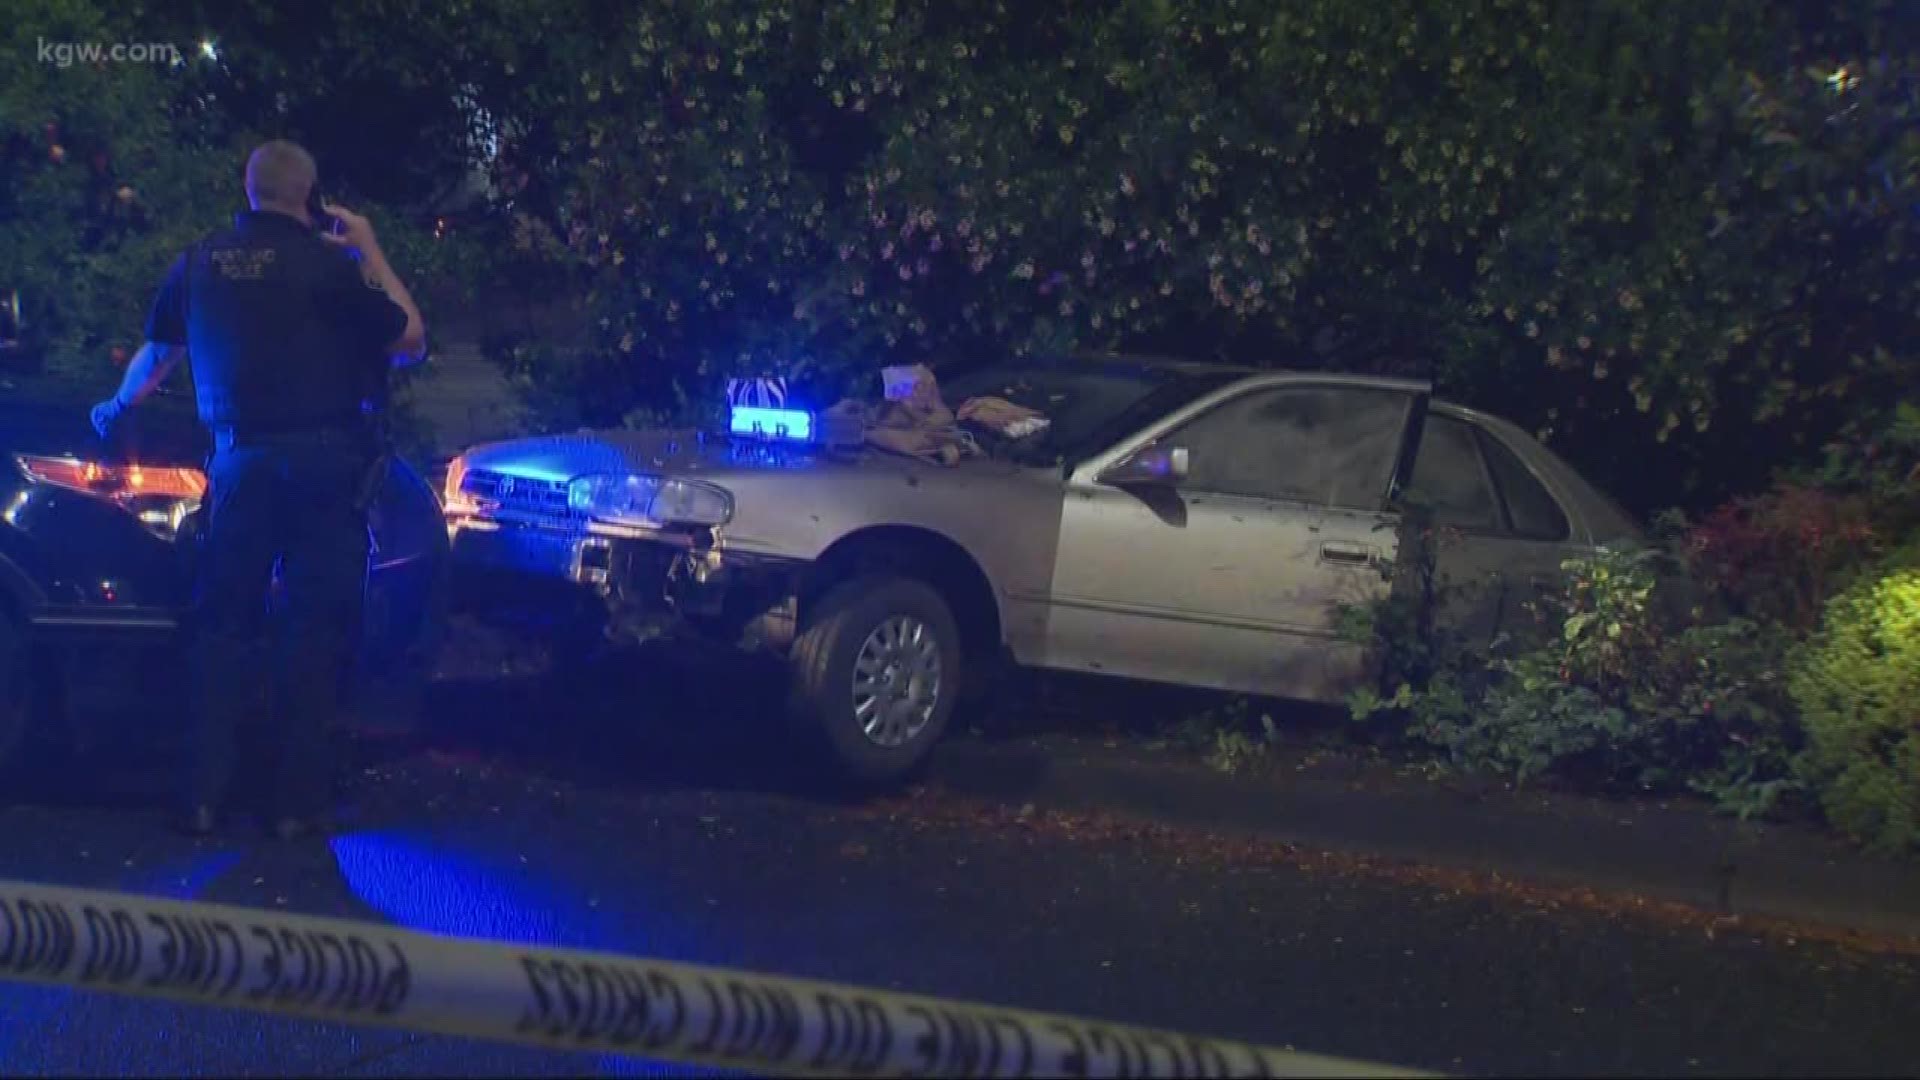 Police arrested a man who crashed his car in Portland's Hollywood neighborhood, struck a man sleeping in trees and ran into a backyard shed to hide after ditching a handgun. Police later found Xanax tablets and cash in the wrecked car, which was stolen.